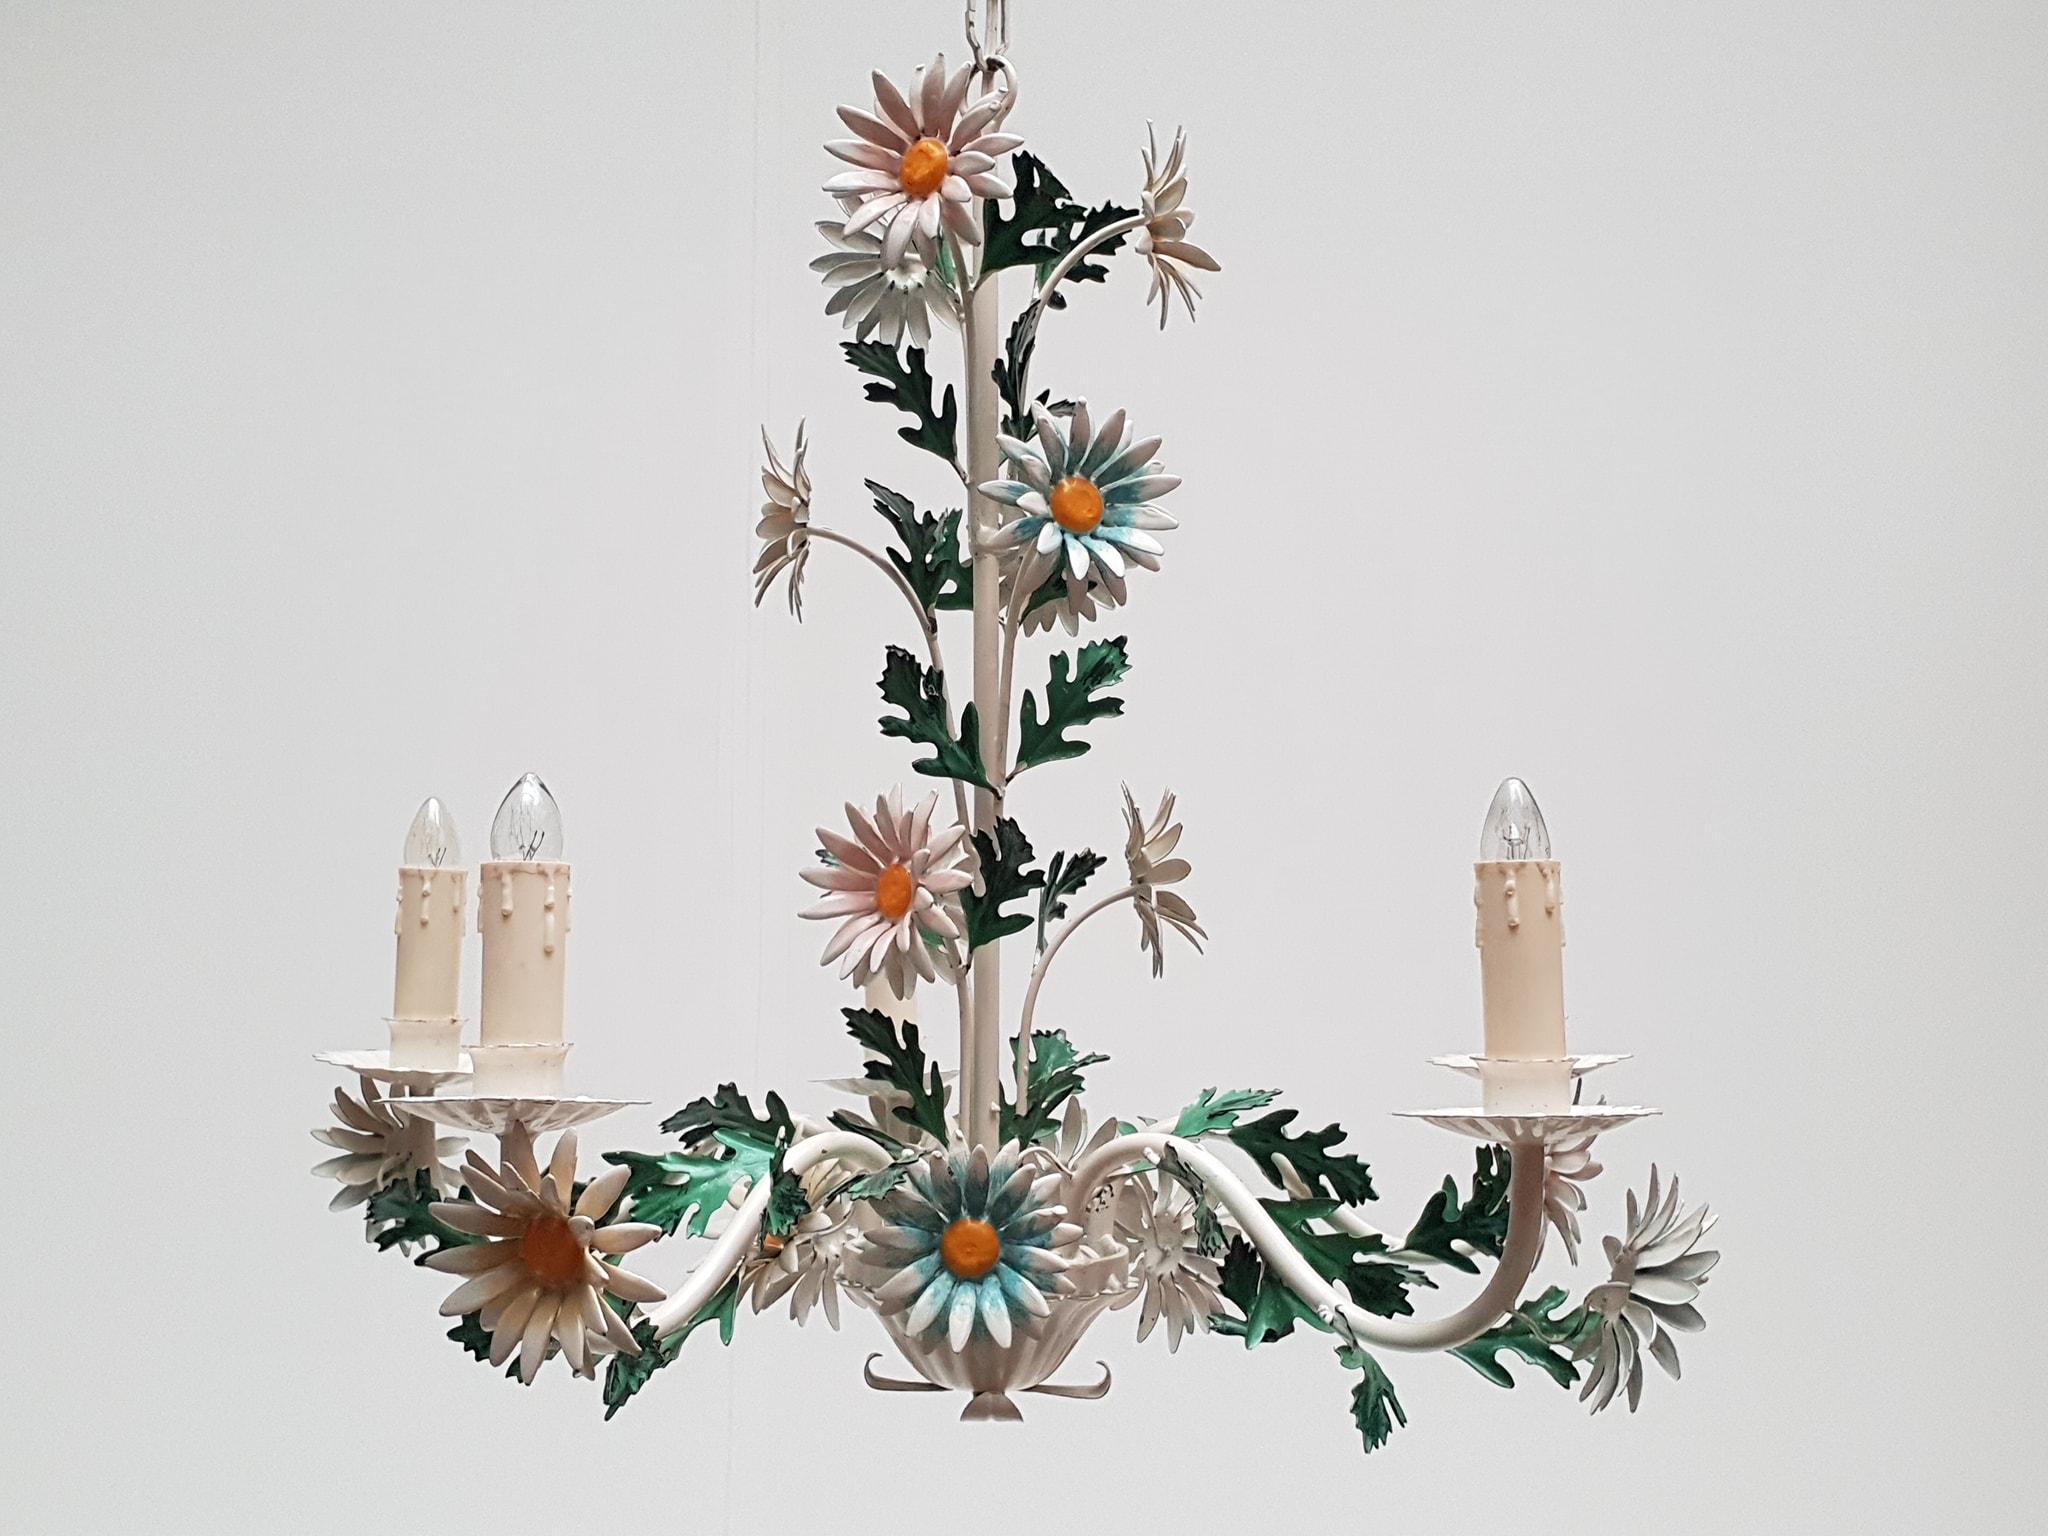 Hollywood Regency Mid-20th Century Italian Painted Iron and Tole Chandelier with Flowers